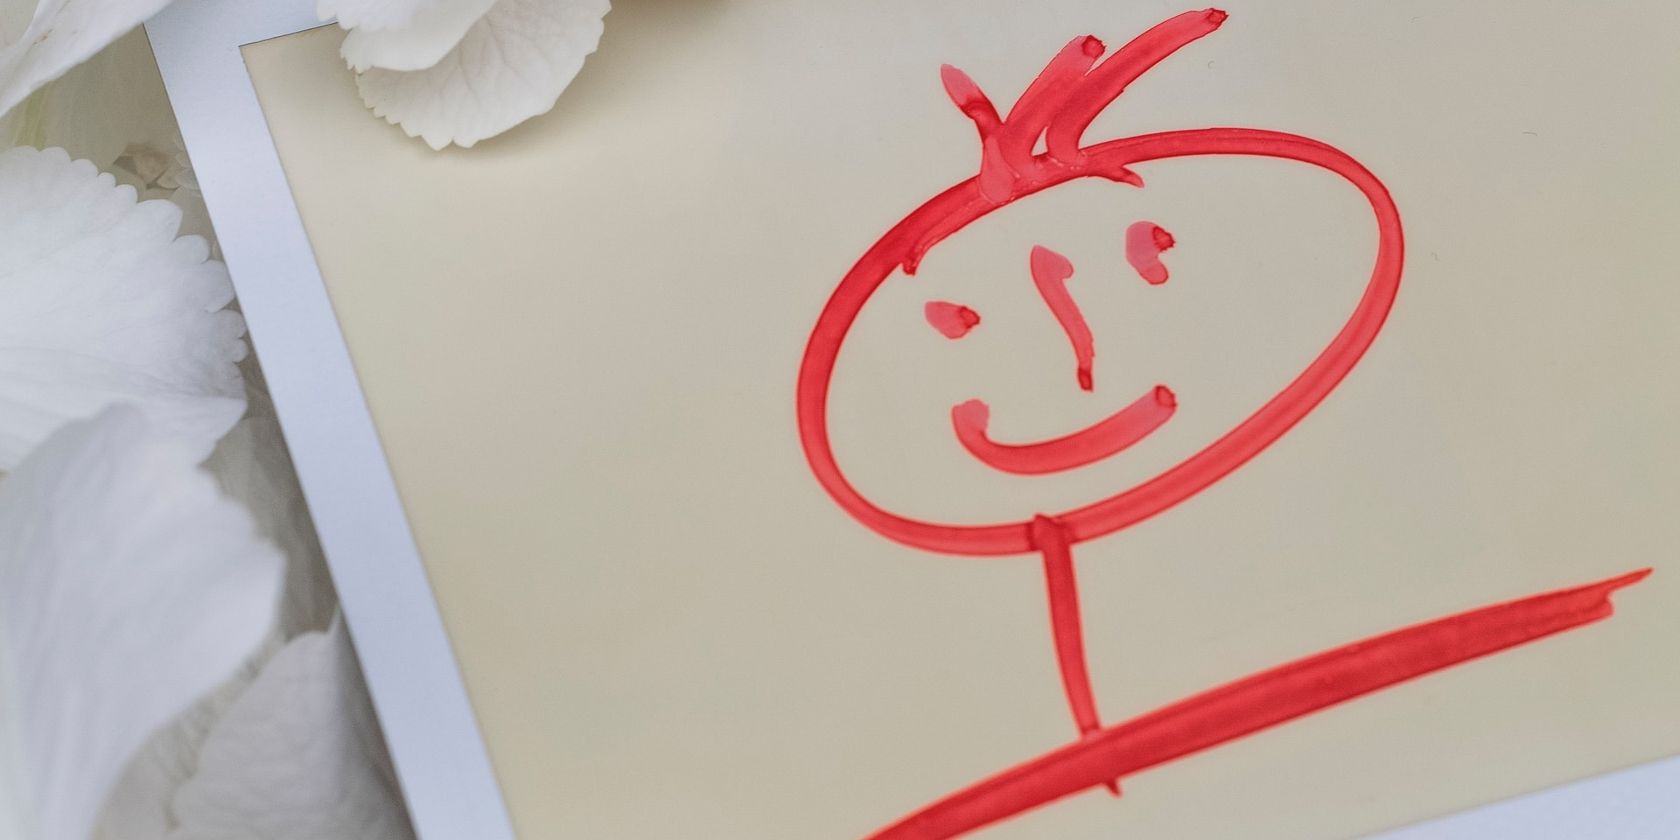 Stick Figure Character Drawn With Red Marker